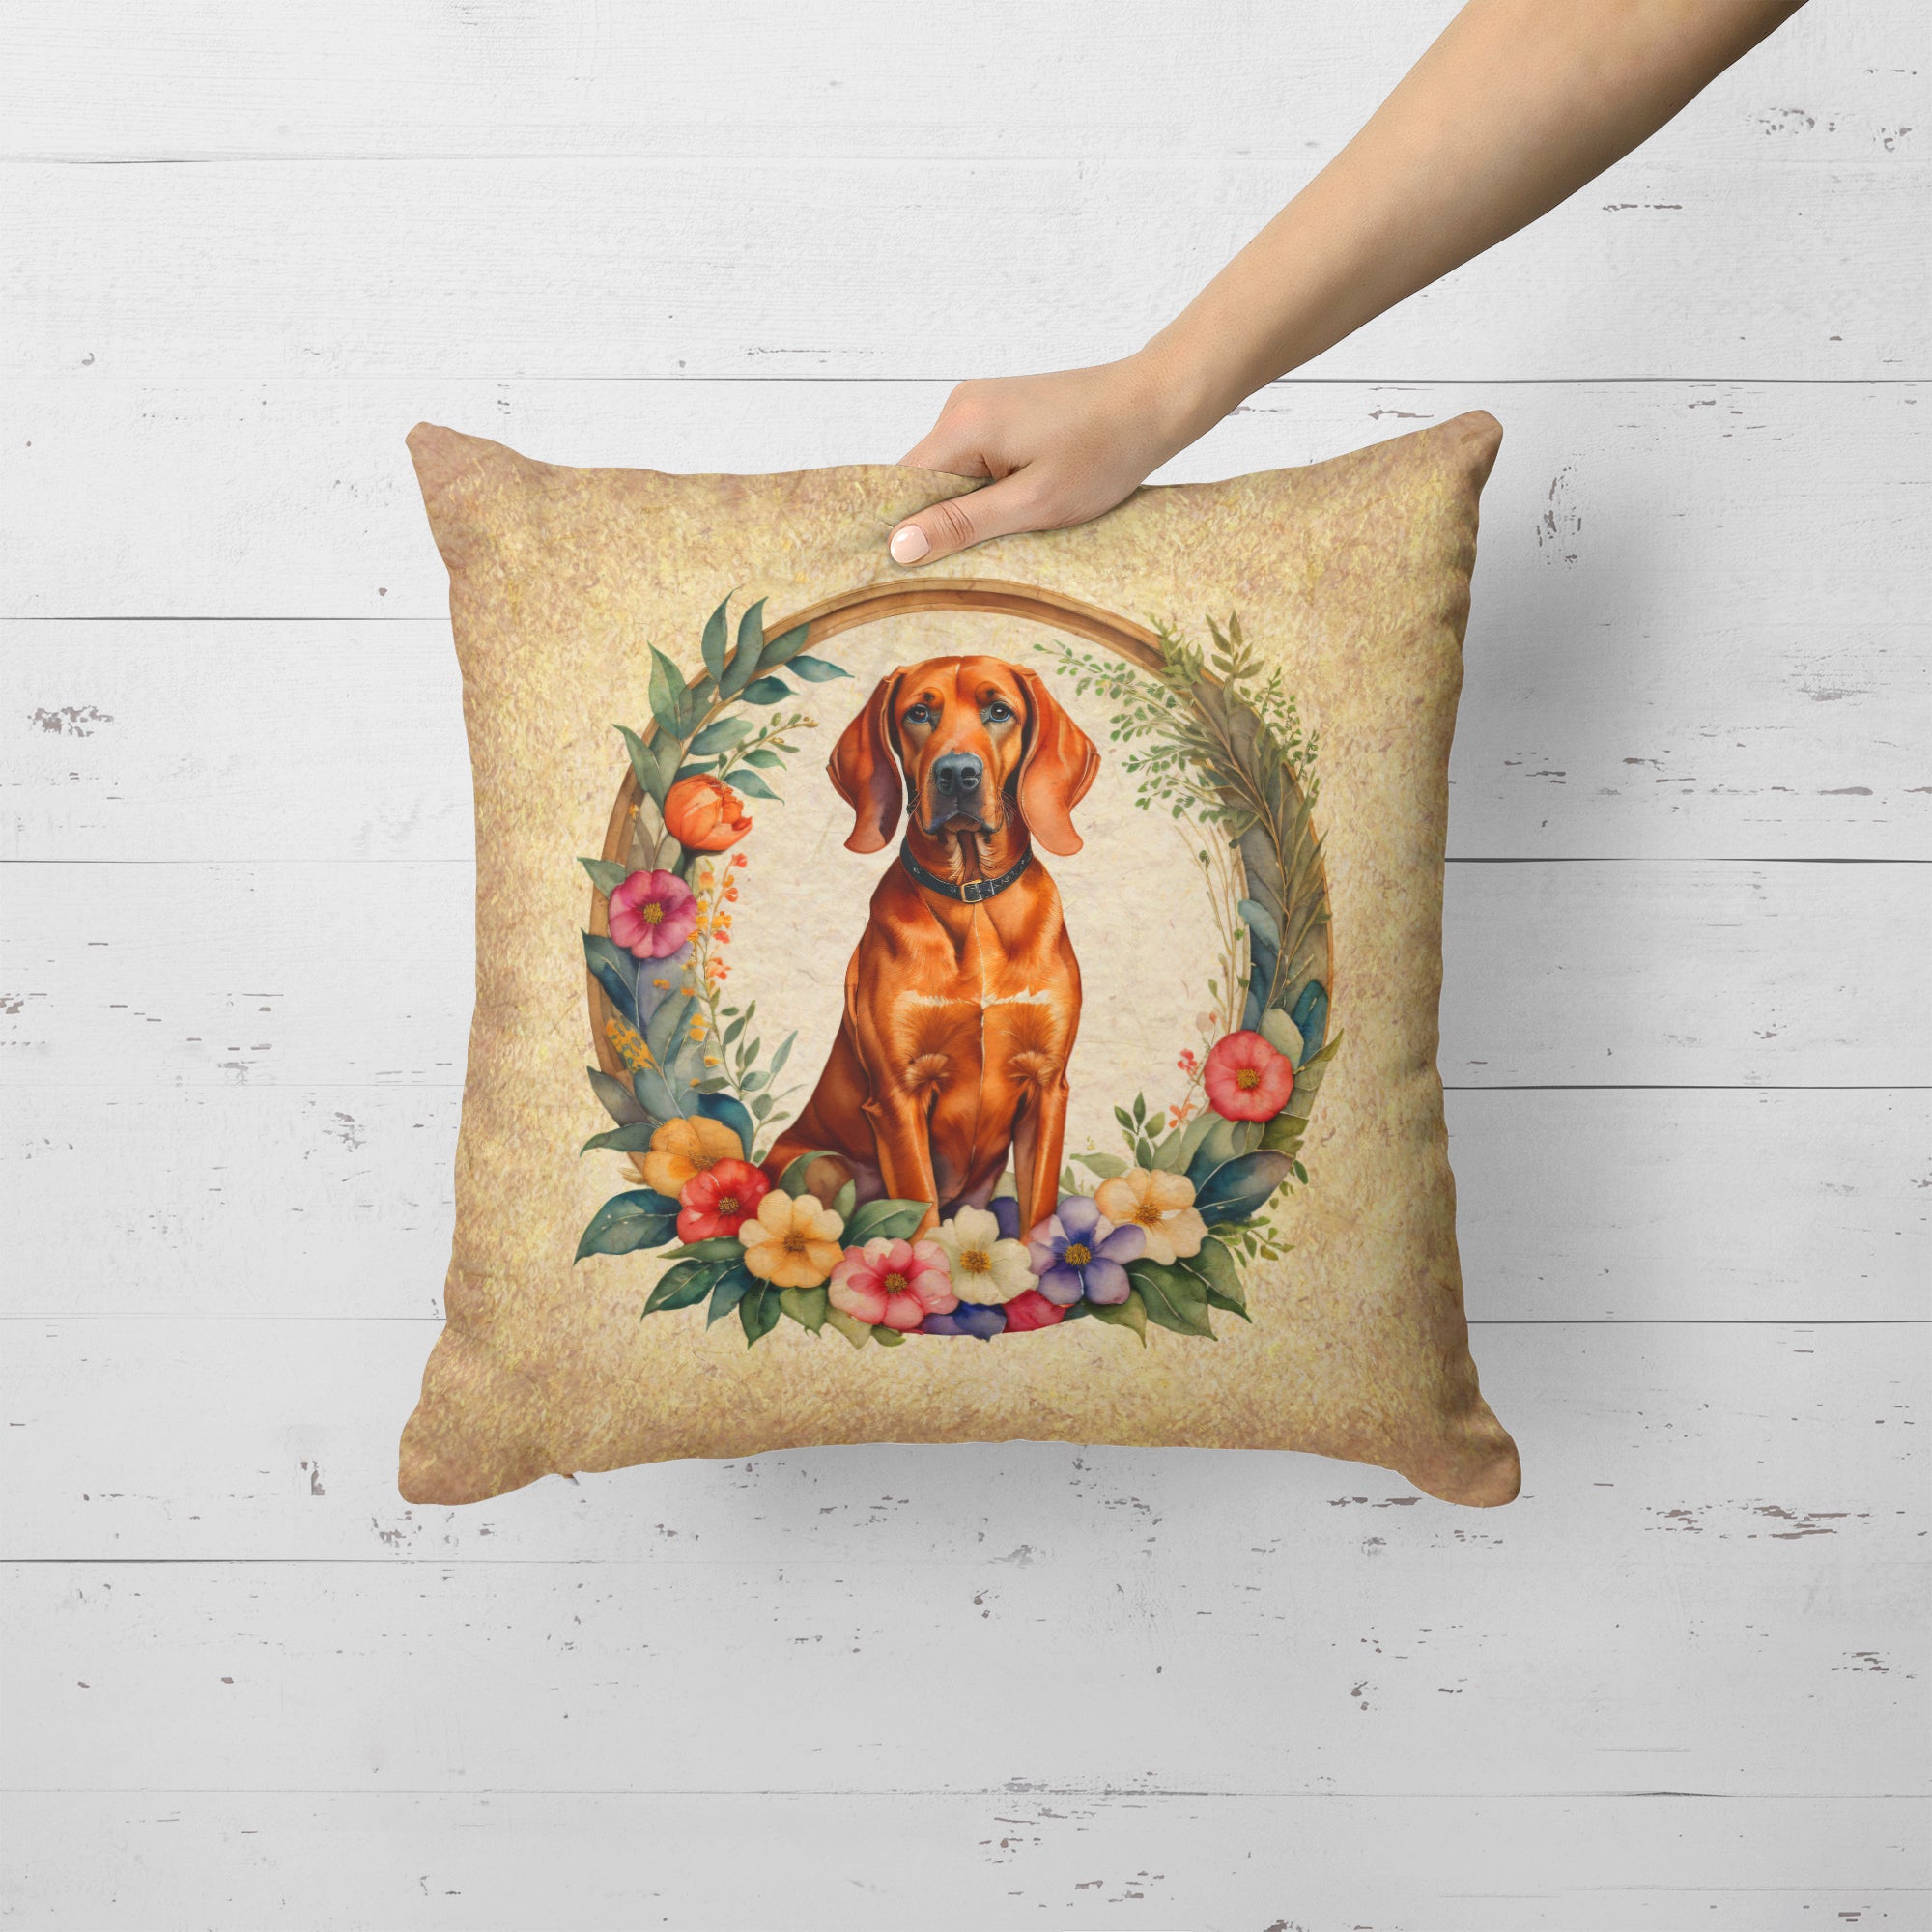 Buy this Redbone Coonhound and Flowers Fabric Decorative Pillow